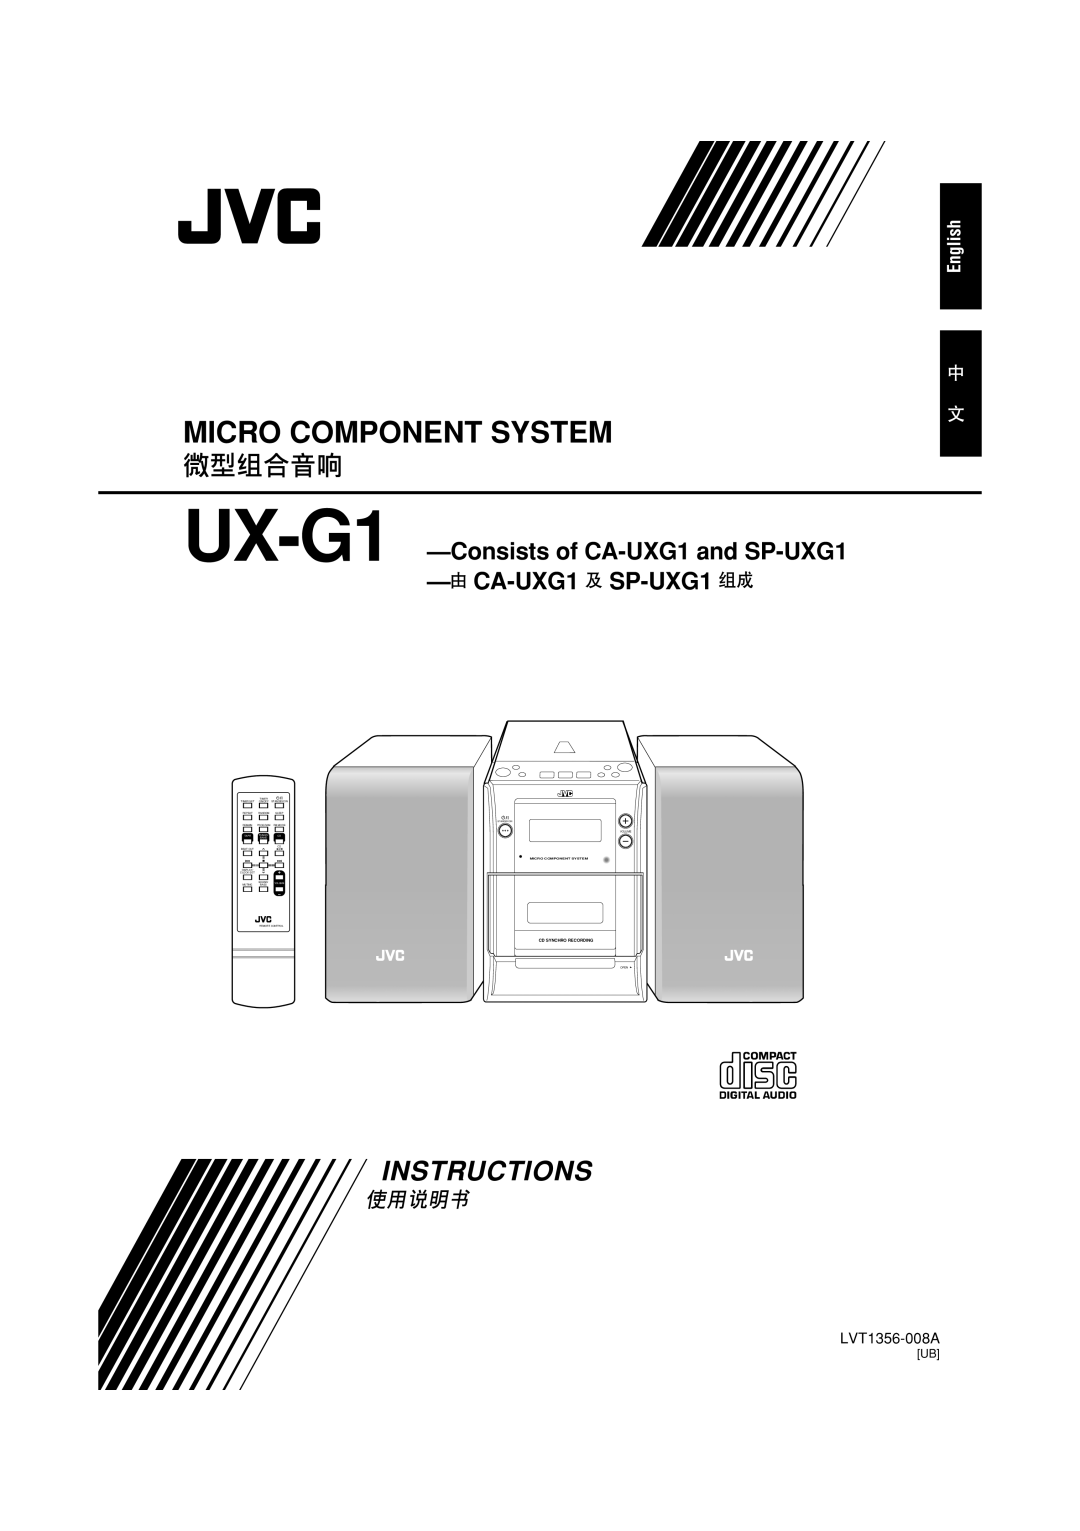 JVC LVT1356-005A manual Micro Component System, Instructions, English, LVT1356-008A, Cd Synchro Recording, Volume, Open 